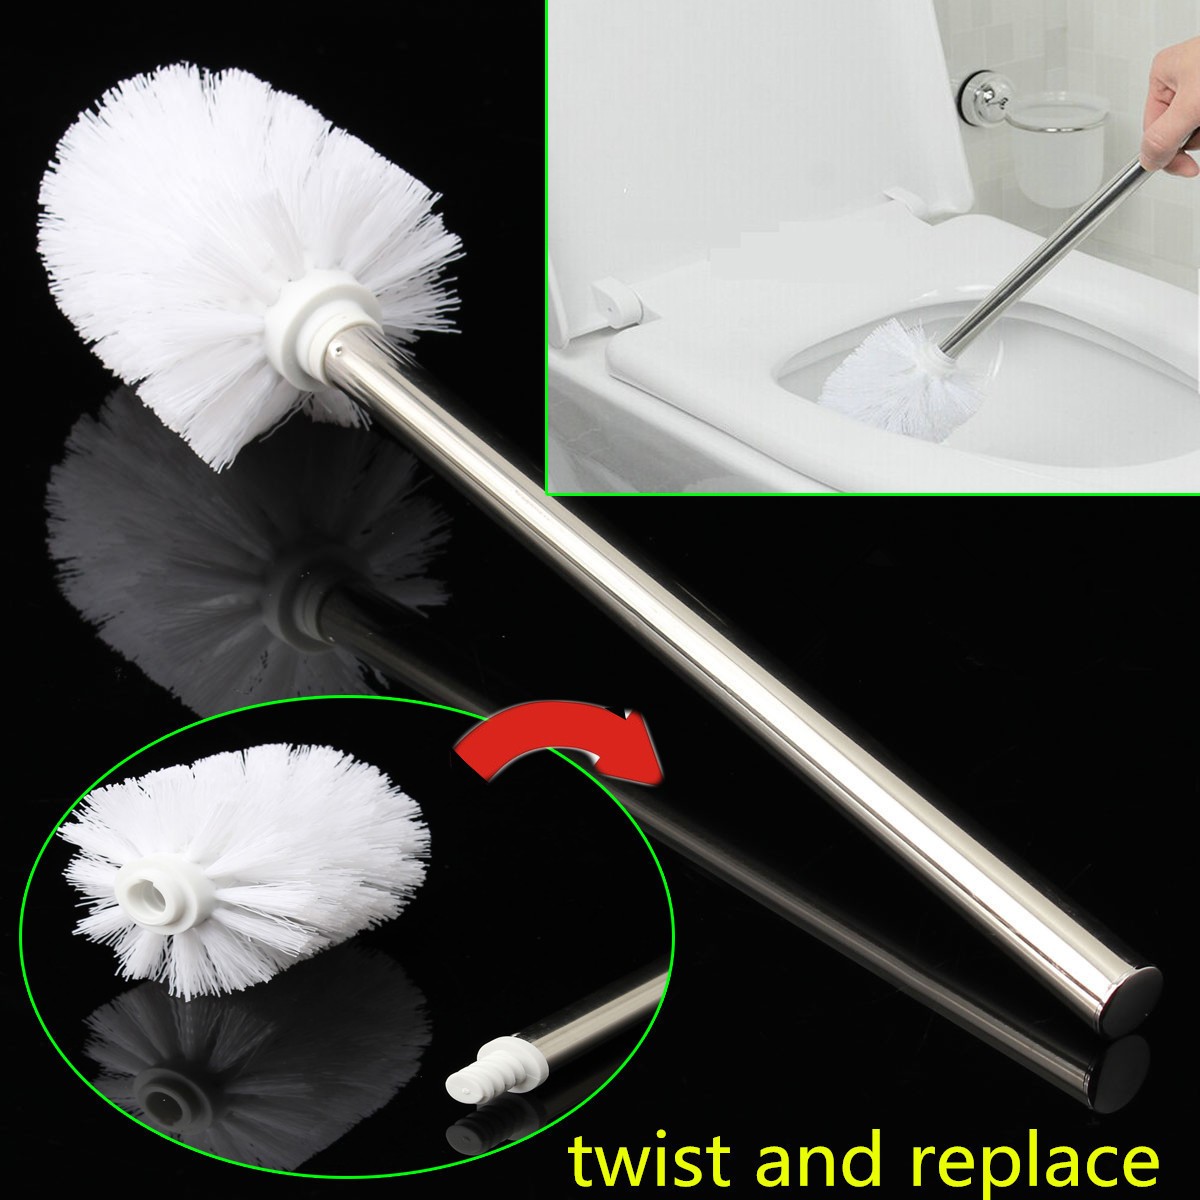 Stainless-Steel-WC-Bathroom-Cleaning-Toilet-Brush-White-Head-Holders-Cleaning-Brushes-1137680-1